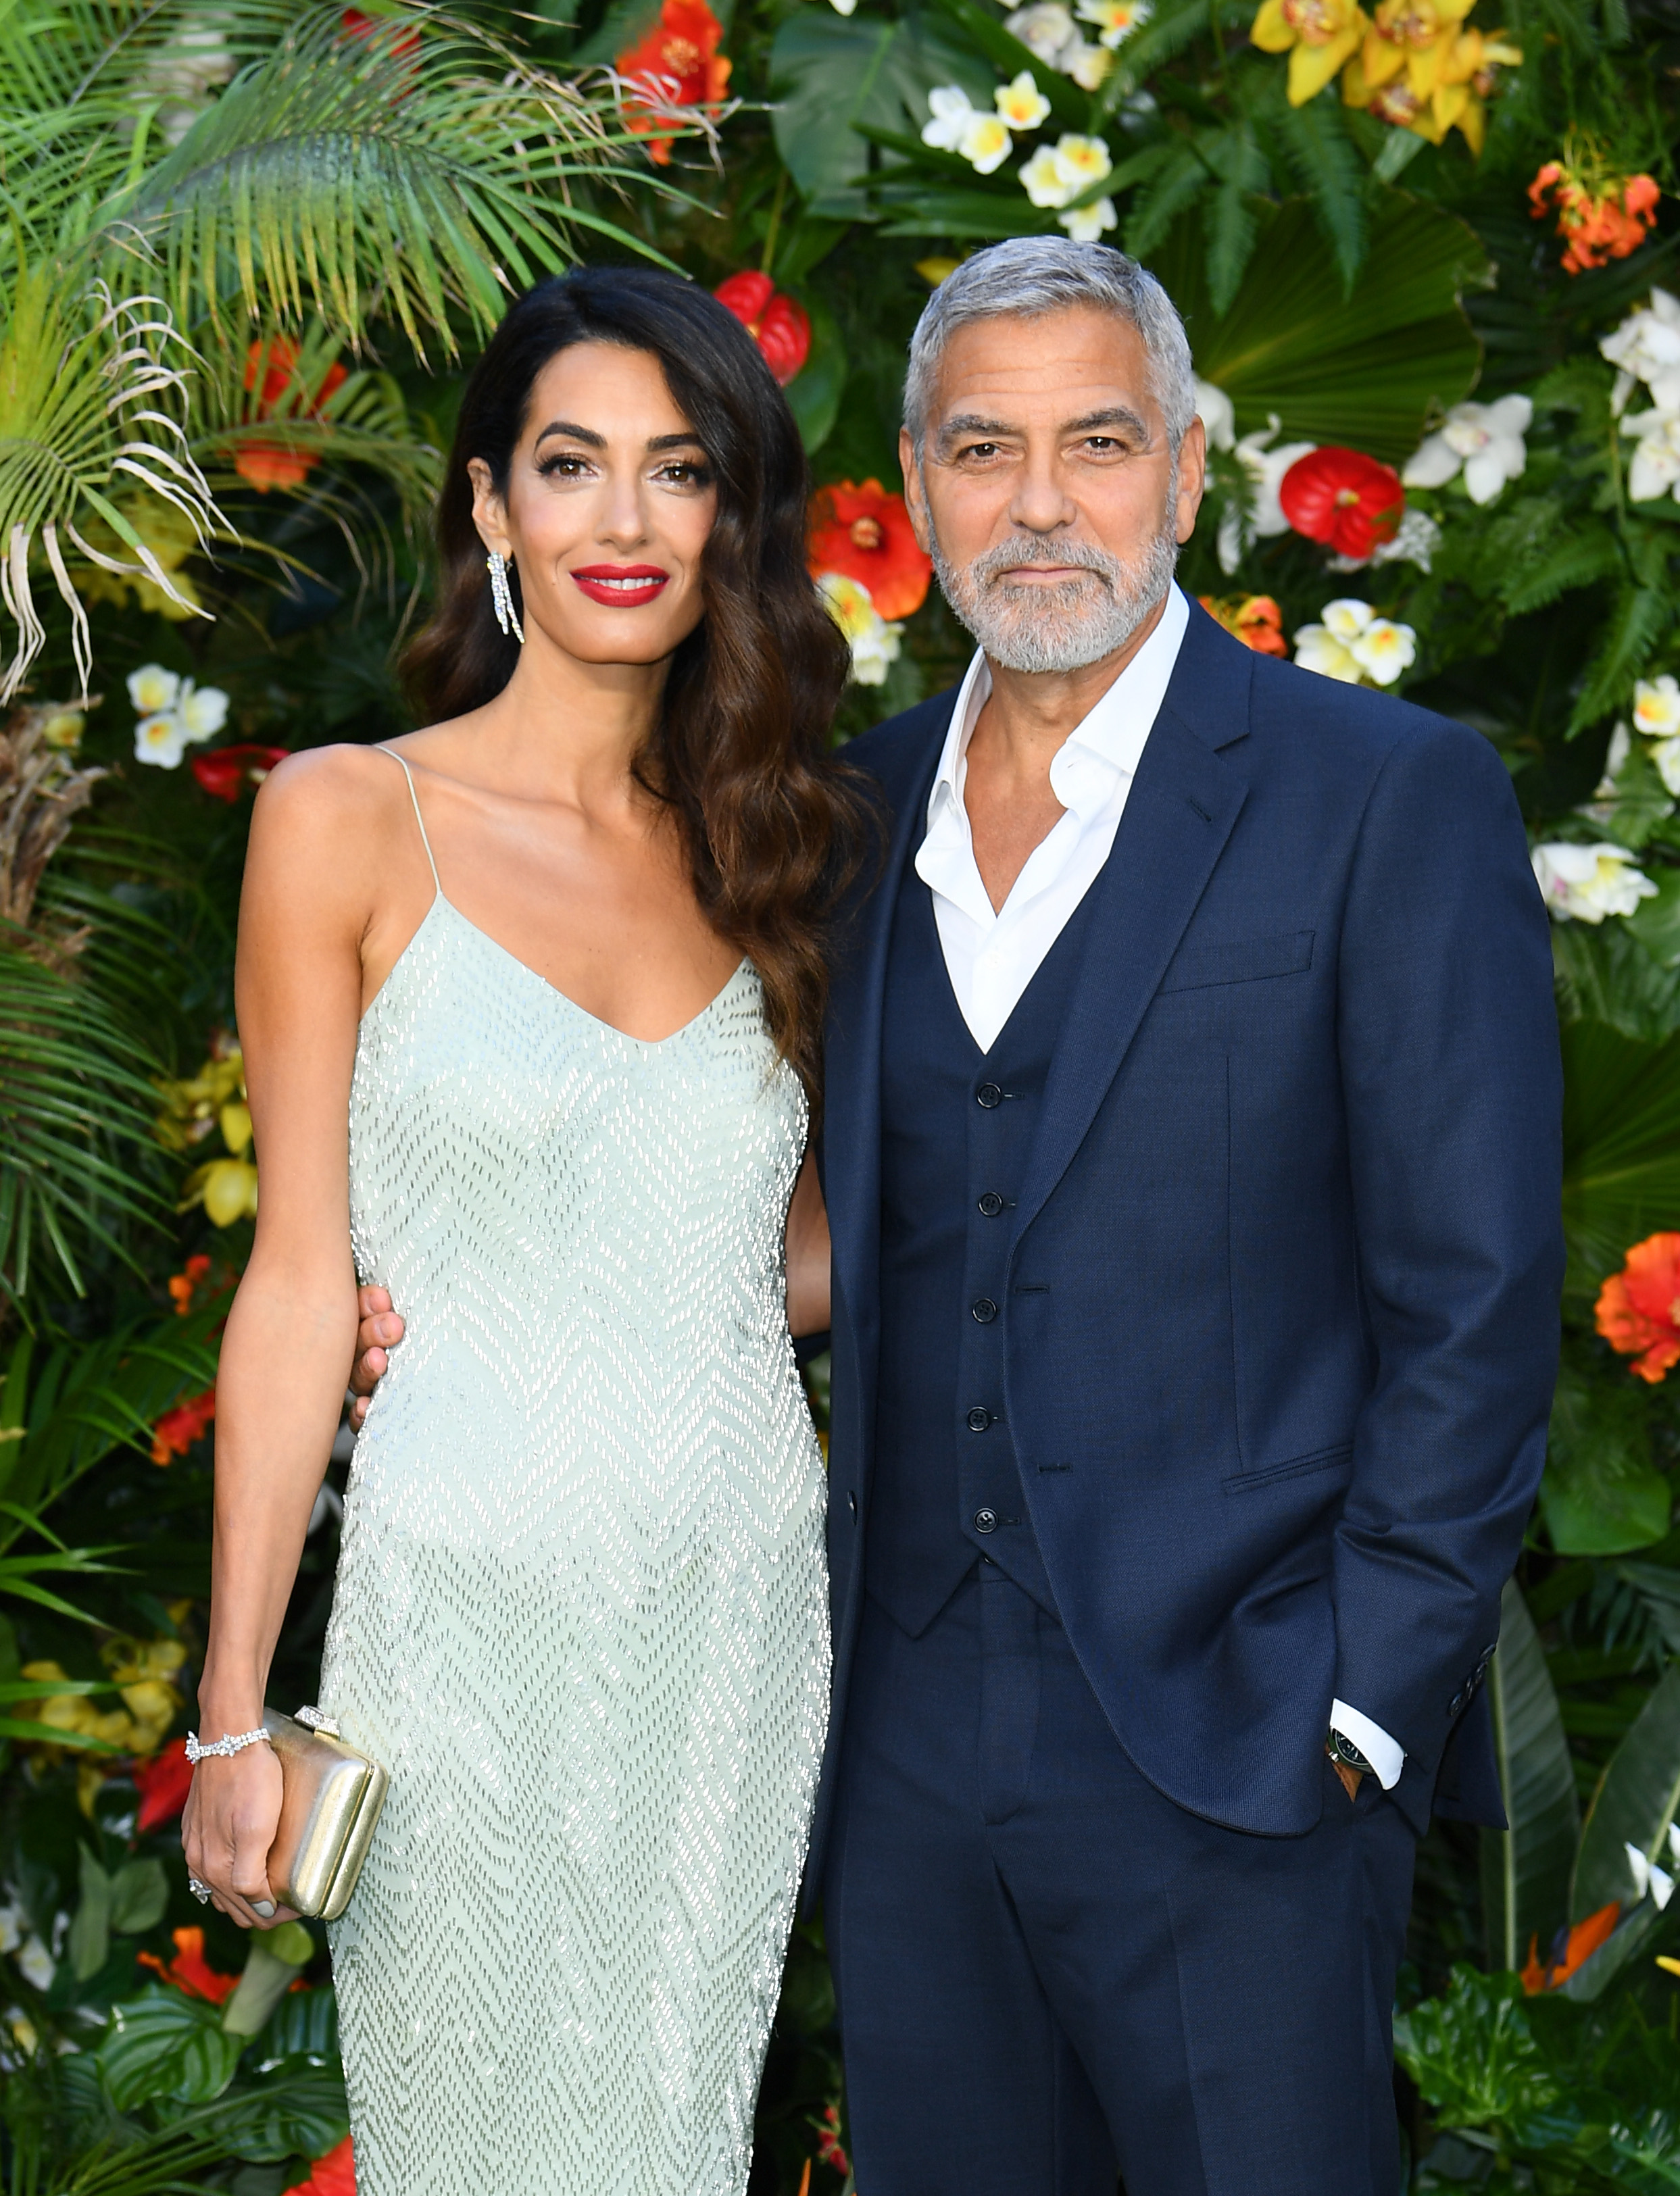 Amal and George Clooney at the world premiere of "Ticket To Paradise" in London, England on September 7, 2022 | Source: Getty Images